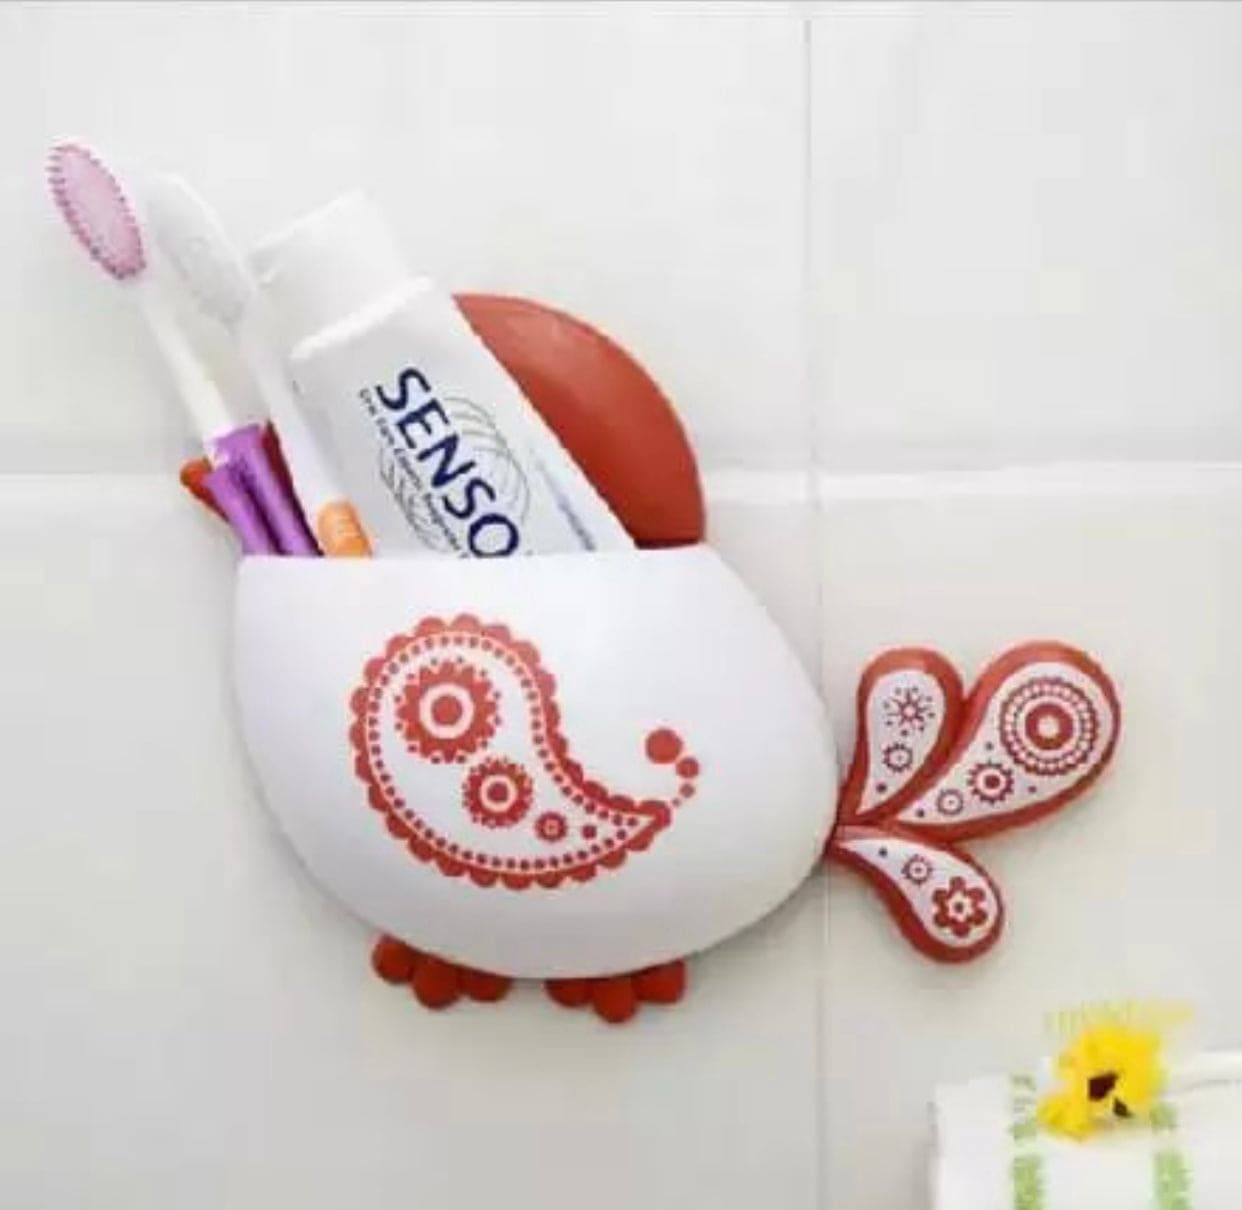 Cartoon Bird Pattern Suction Cup Tooth Brush Holder, Cute Cartoon Sucker Hook Toothbrush Holder, Wall Mounted Pen And Toothpaste Rack, Drain Free Comb Spoons Storage Box